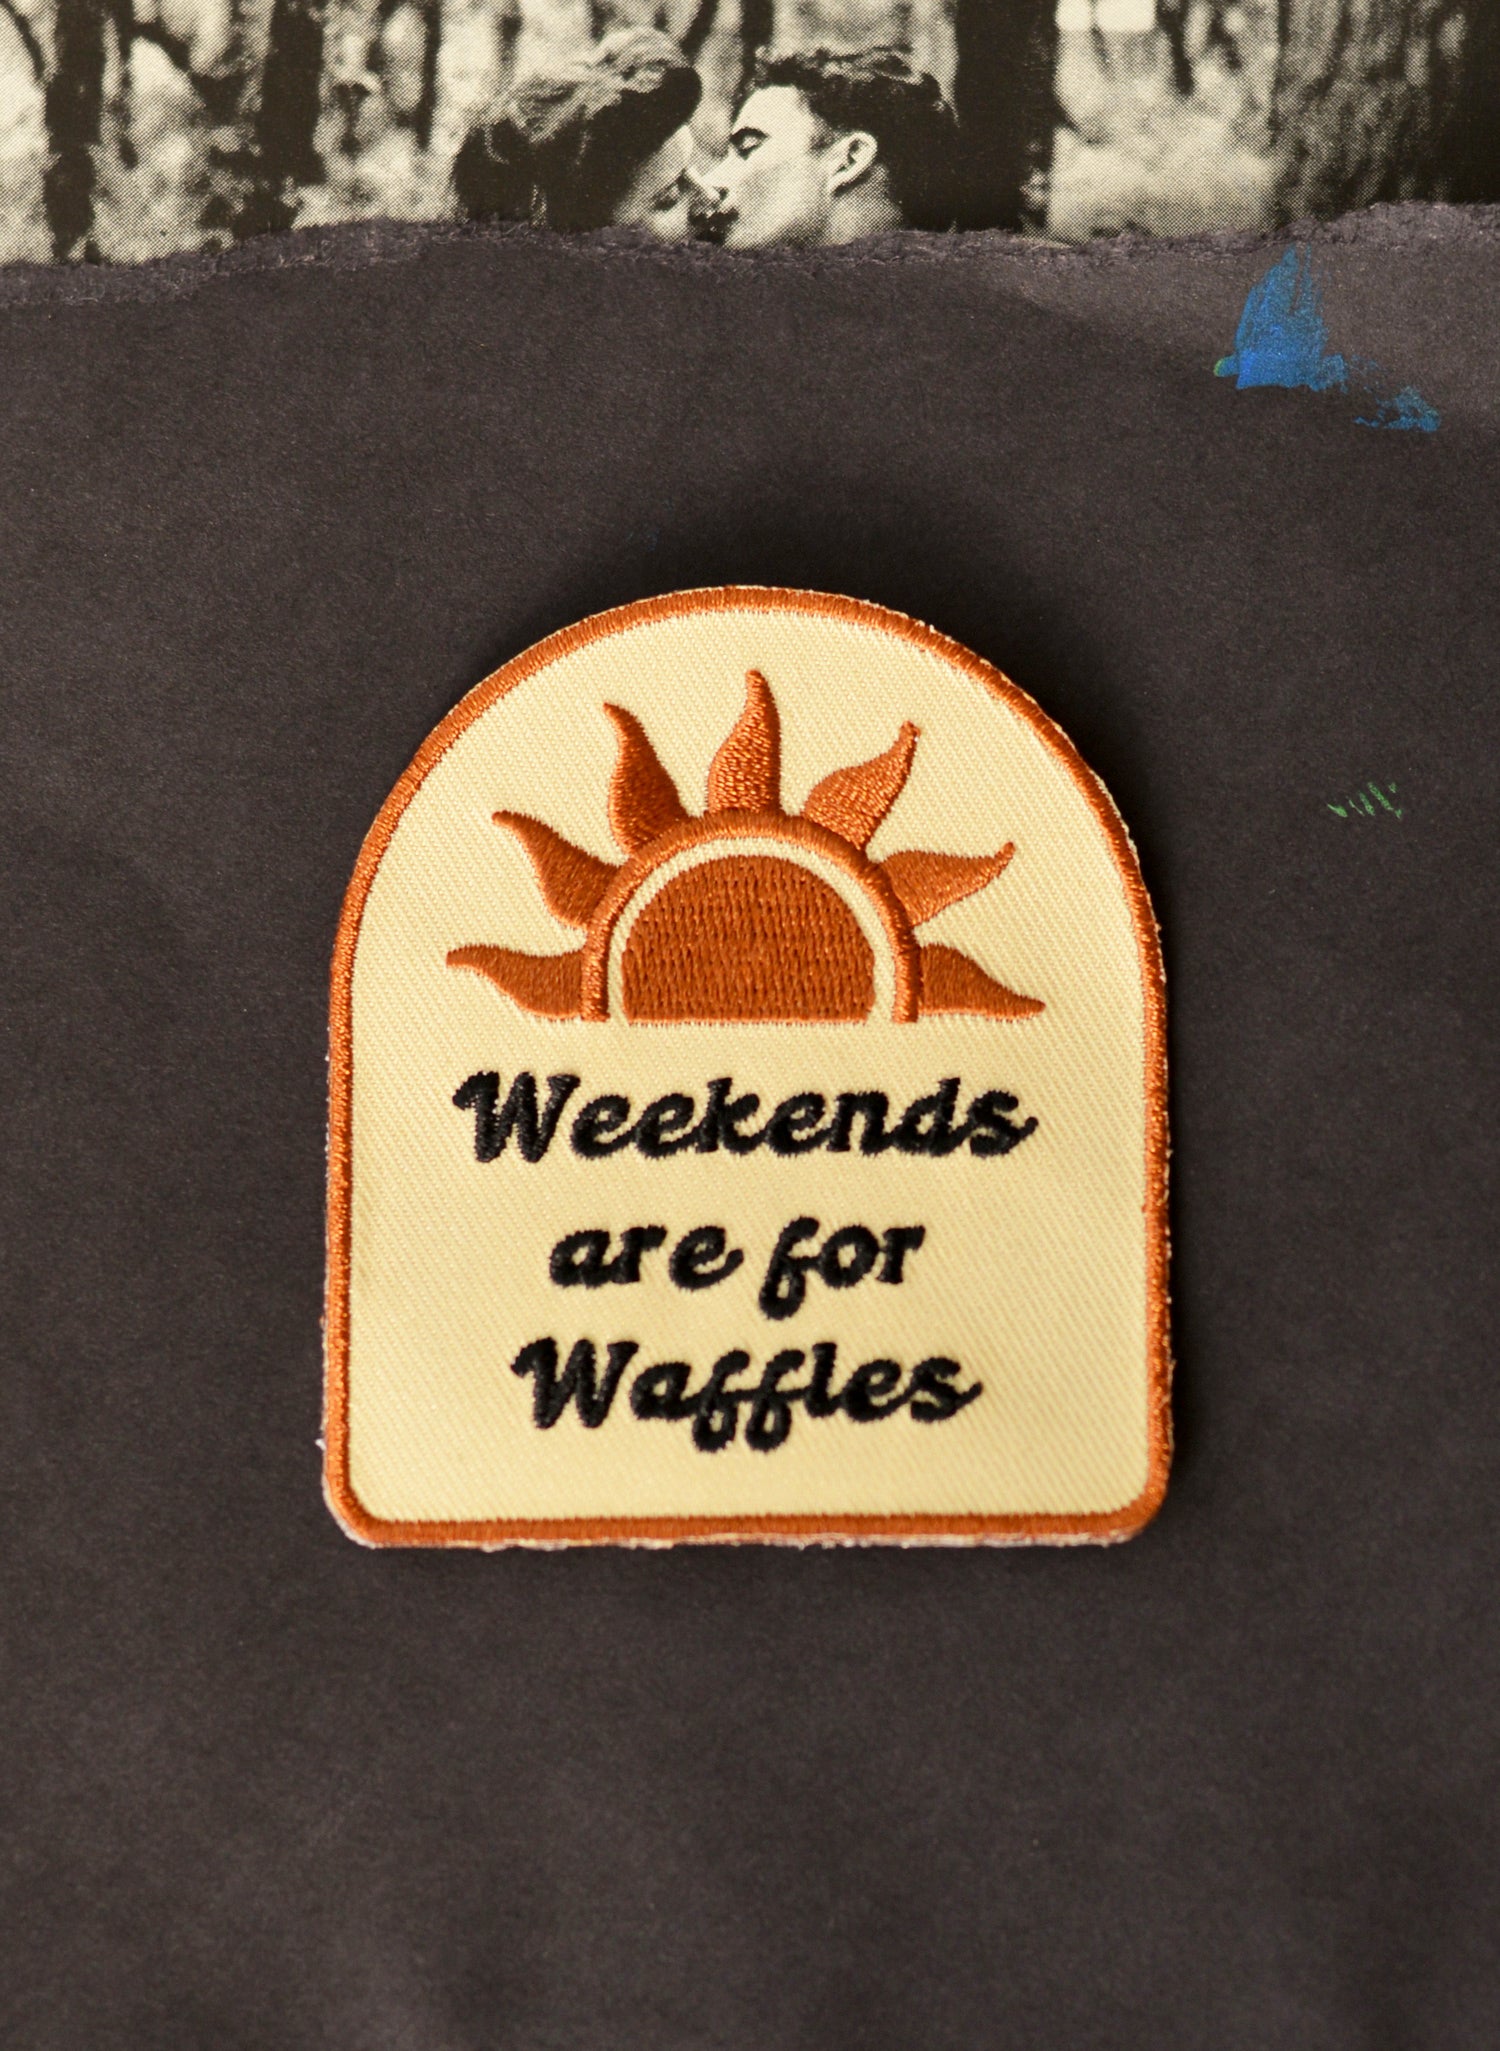 Weekends are for Waffles Brunch Sunday Funday Breakfast Syrup Embroidered Patch